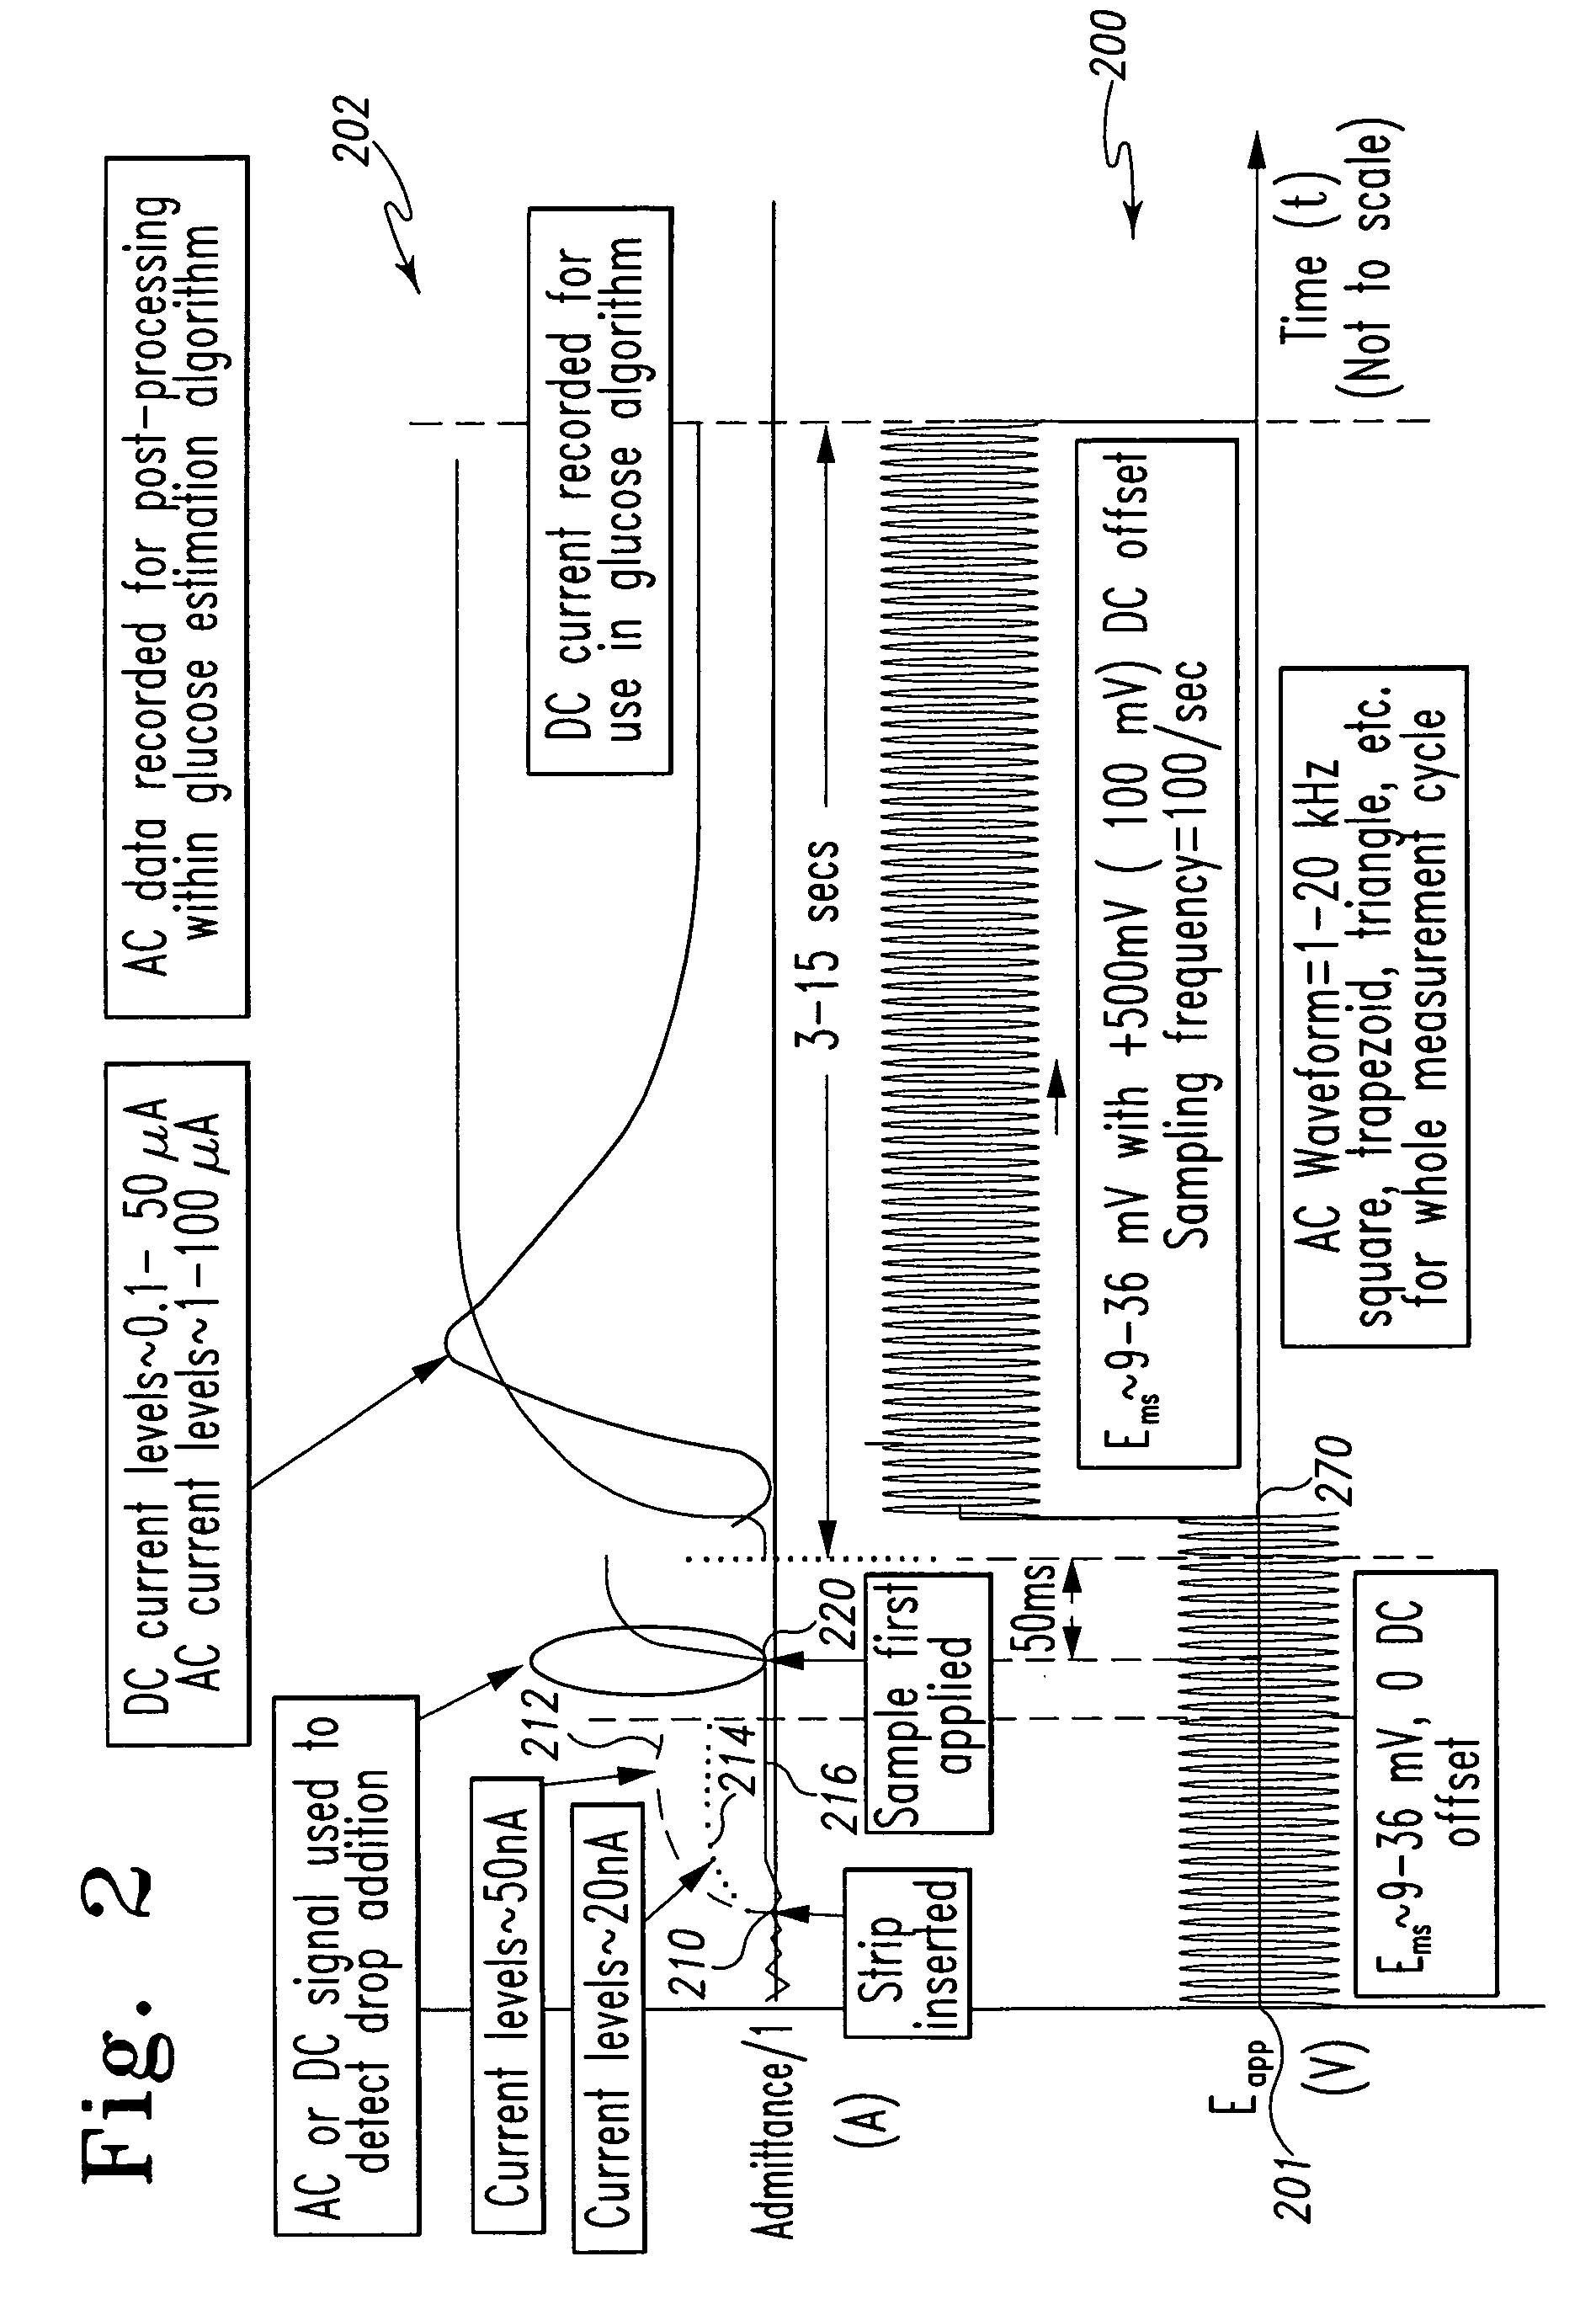 System and method for analyte measurement